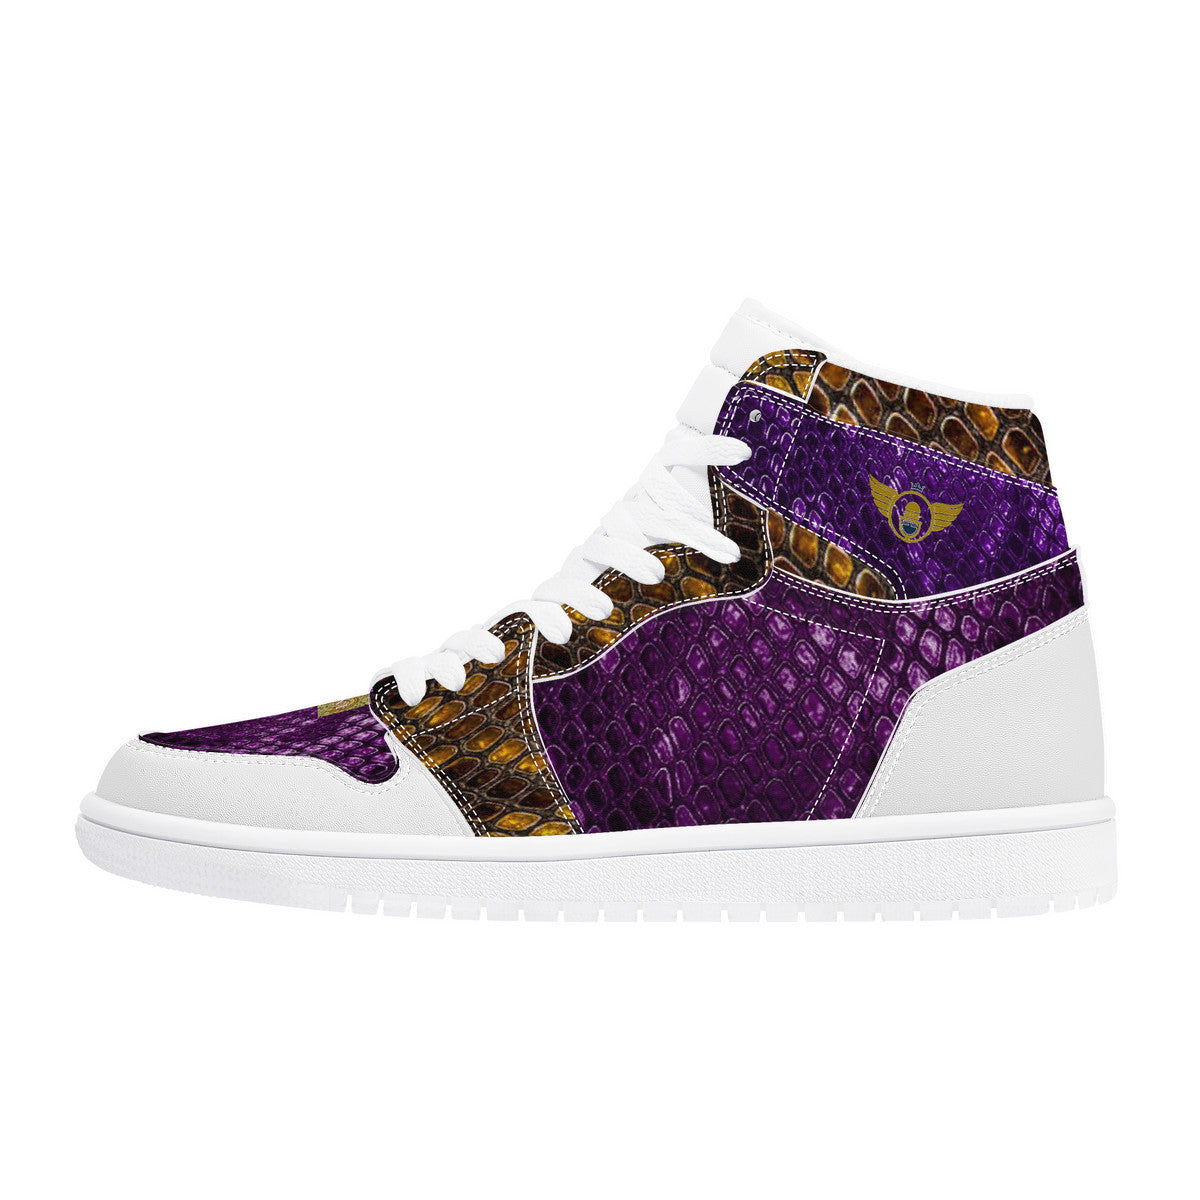 Majestic Purple and Gold | Vision 1 Collection | High Top Sneaker - Designed Shoe Drop - Shoe Zero